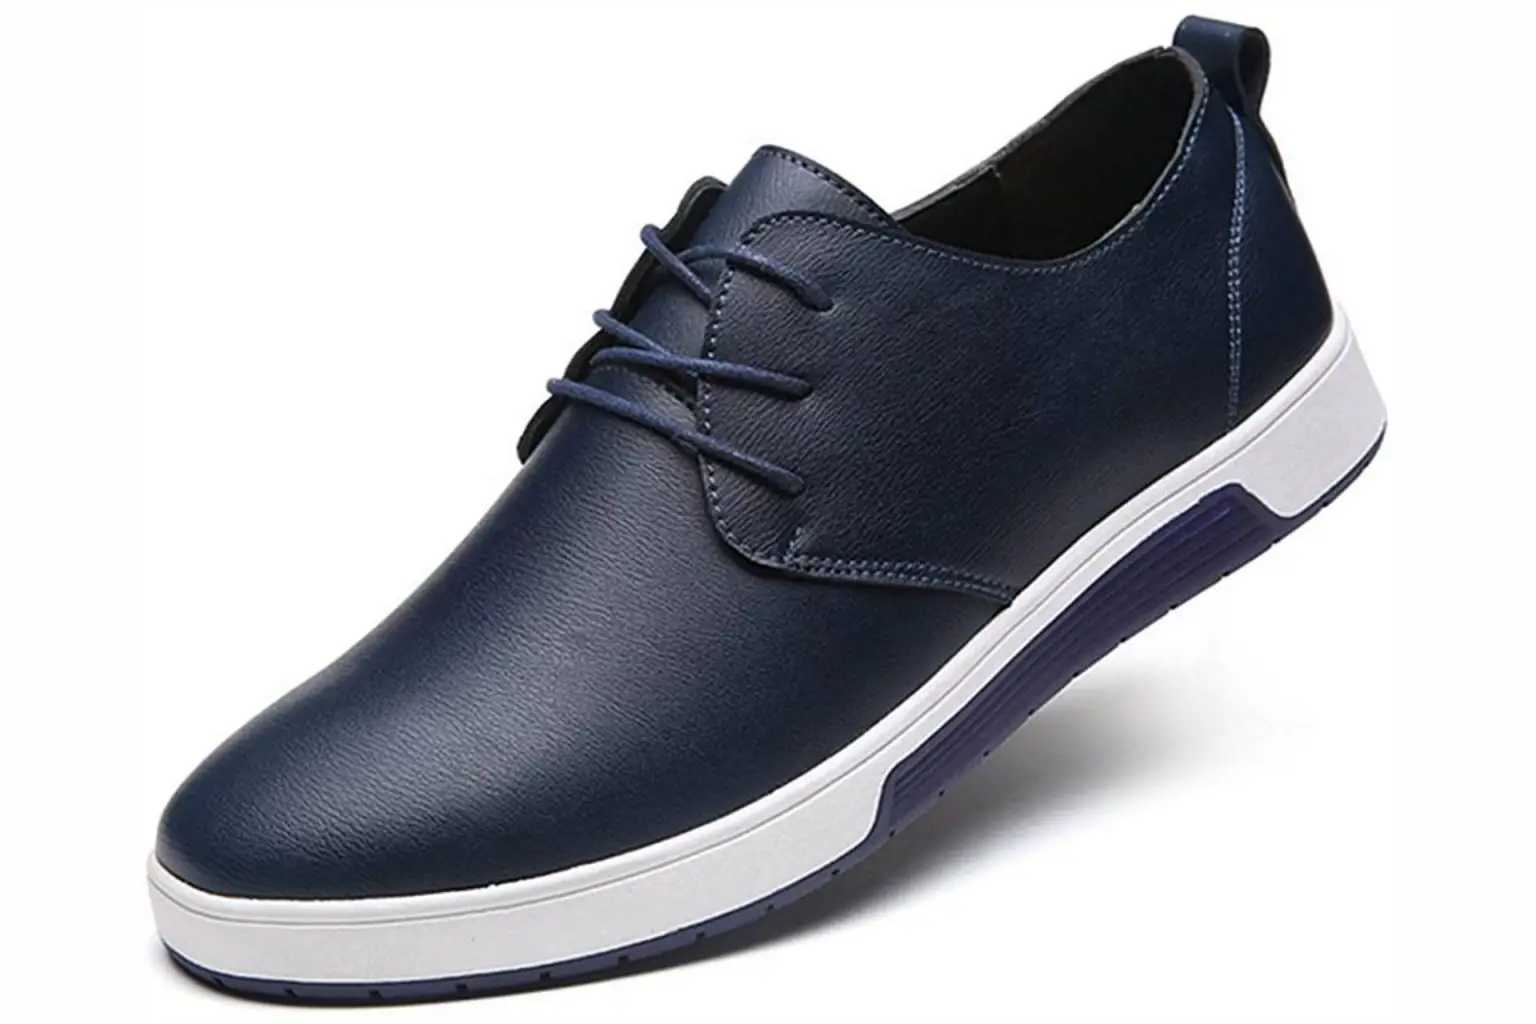 Best 20 Men’s High-quality Dress Shoes Under $50 in 2023